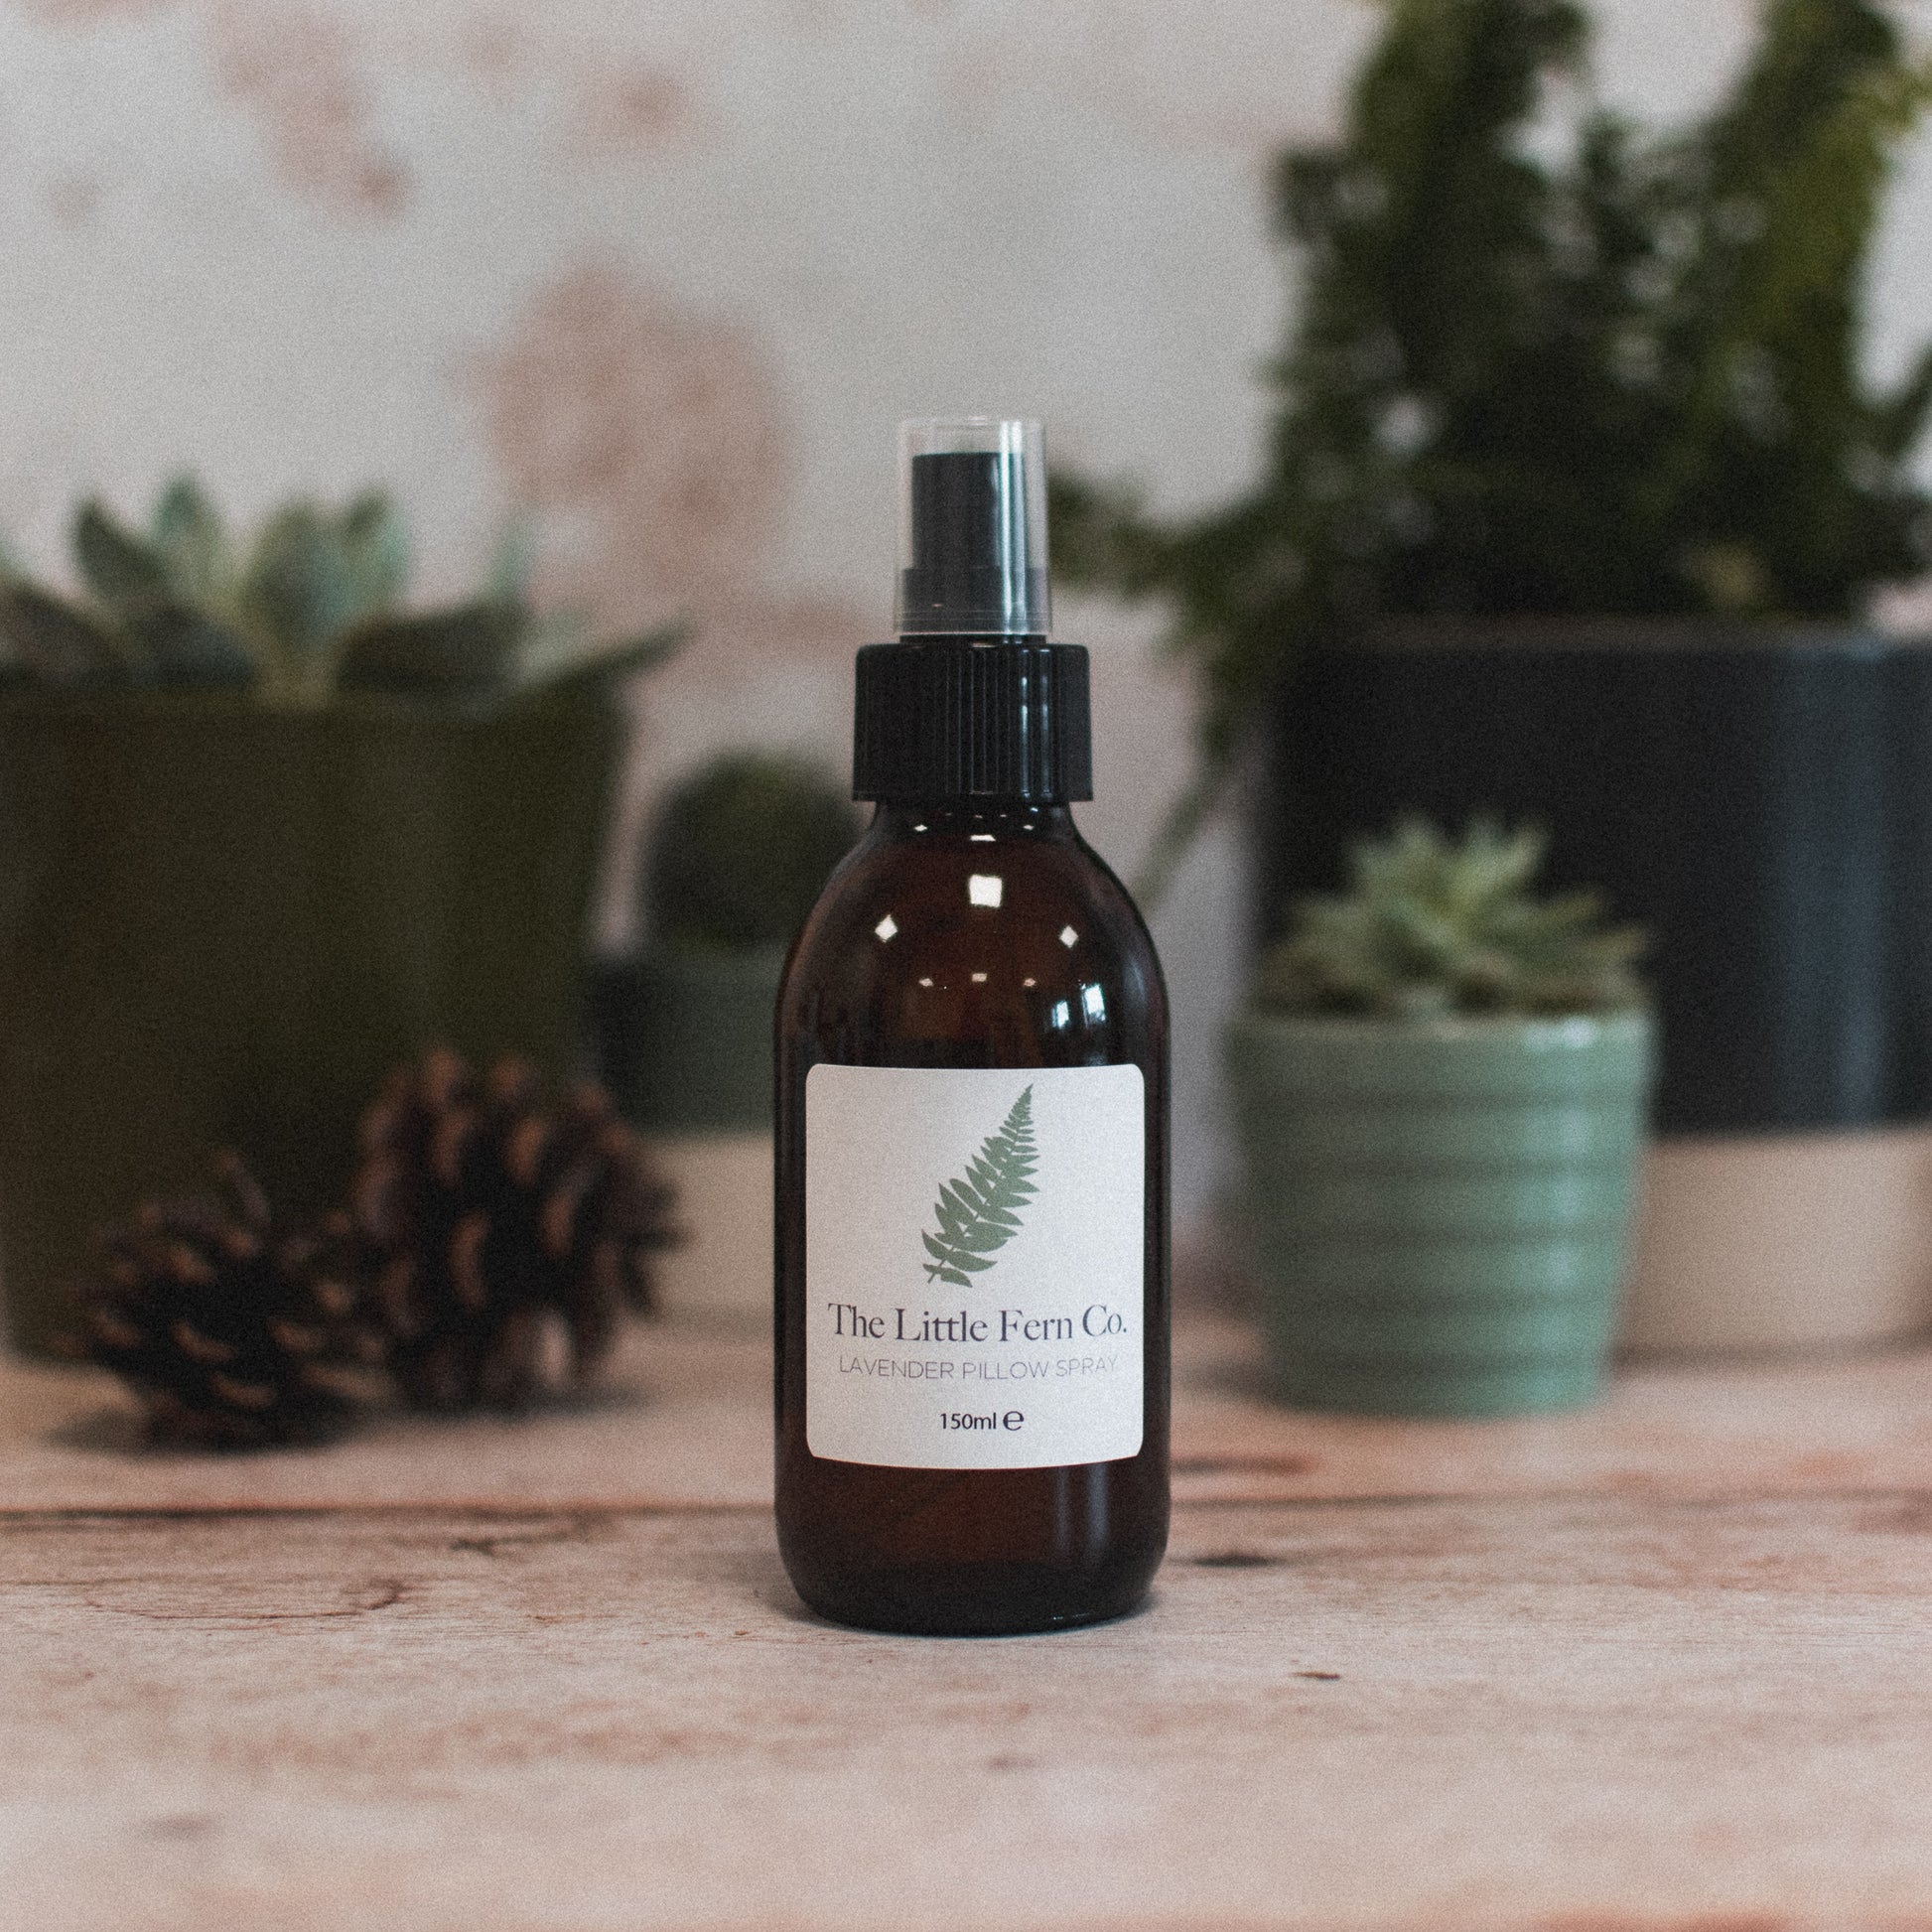 Handmade Pillow Spray - Natural Essential Oil Benefits from The Little Fern Co